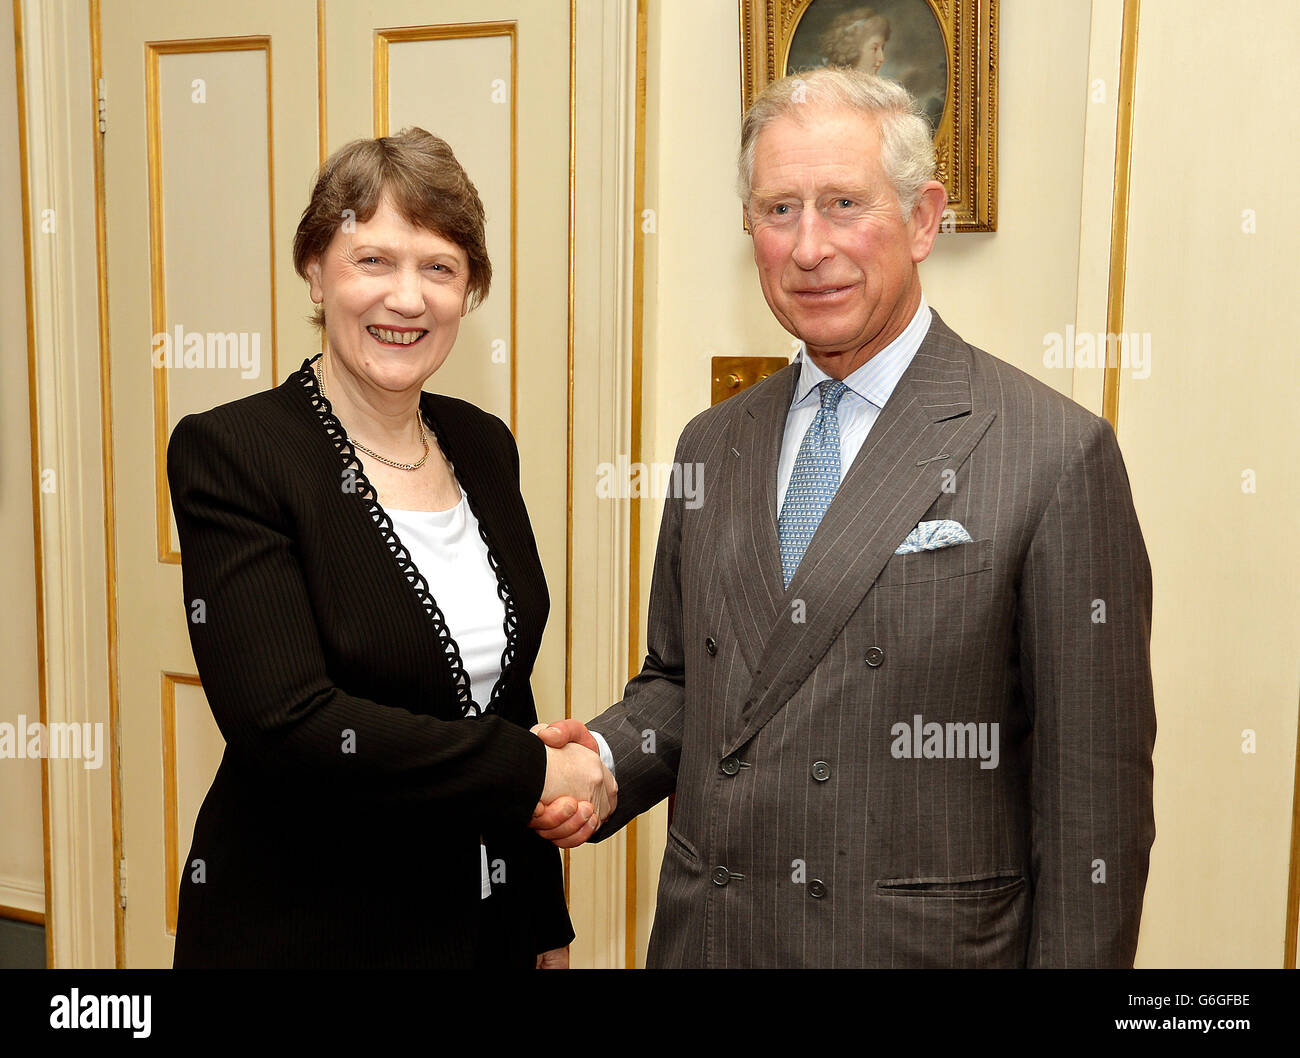 The Prince of Wales shakes hands with Helen Clark the former Prime Minister of New Zealand, during a private meeting in the Garden room at Clarence House in central London. Stock Photo